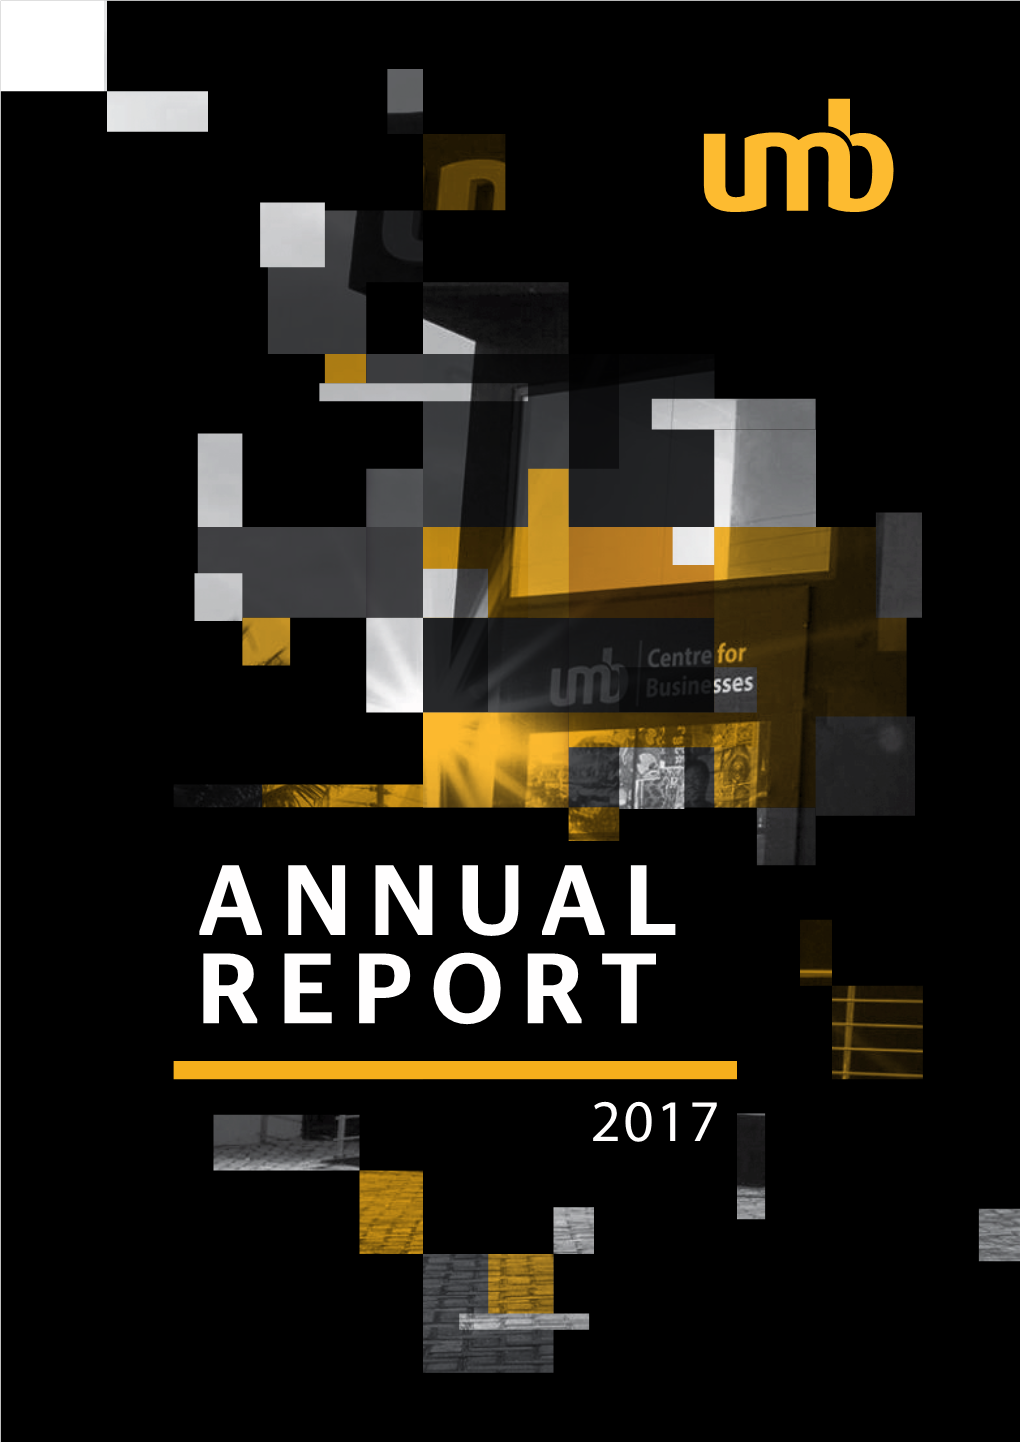 2017 Annual Report 3 Notice of Annual General Meeting